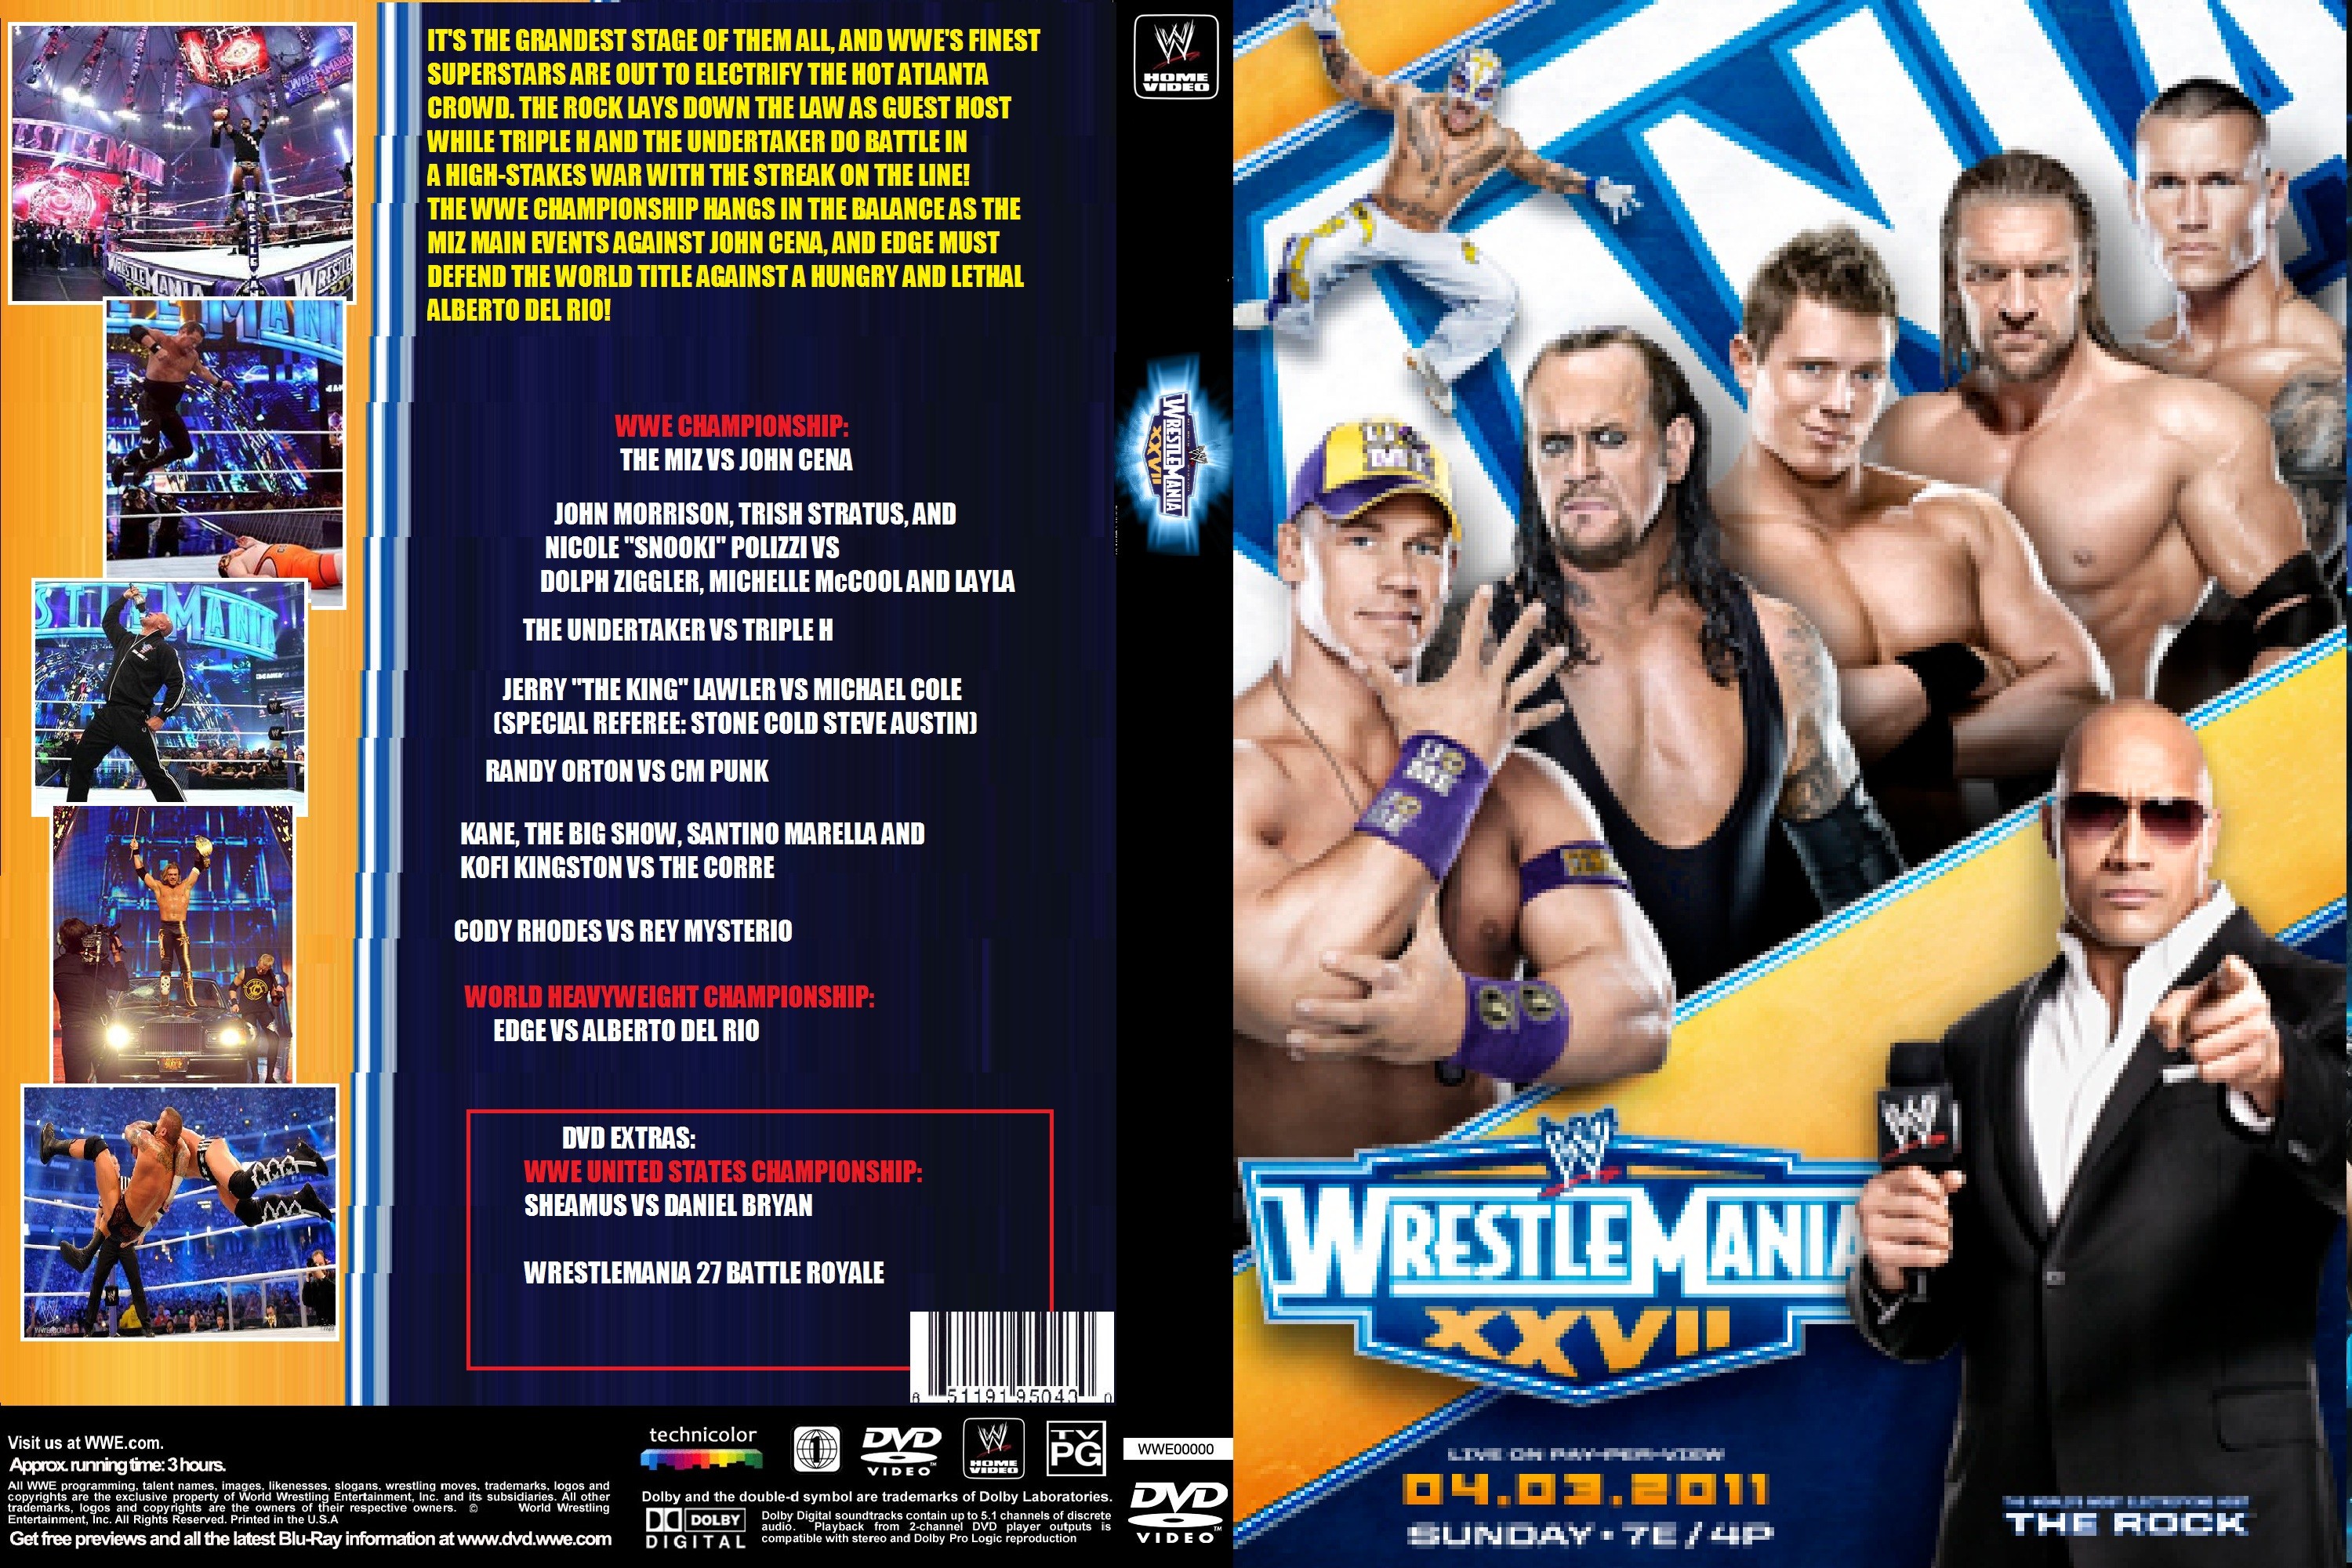 3000x2000 Wrestlemania 27 DVD Cover by ZT4 Wrestlemania 27 DVD Cover by ZT4...